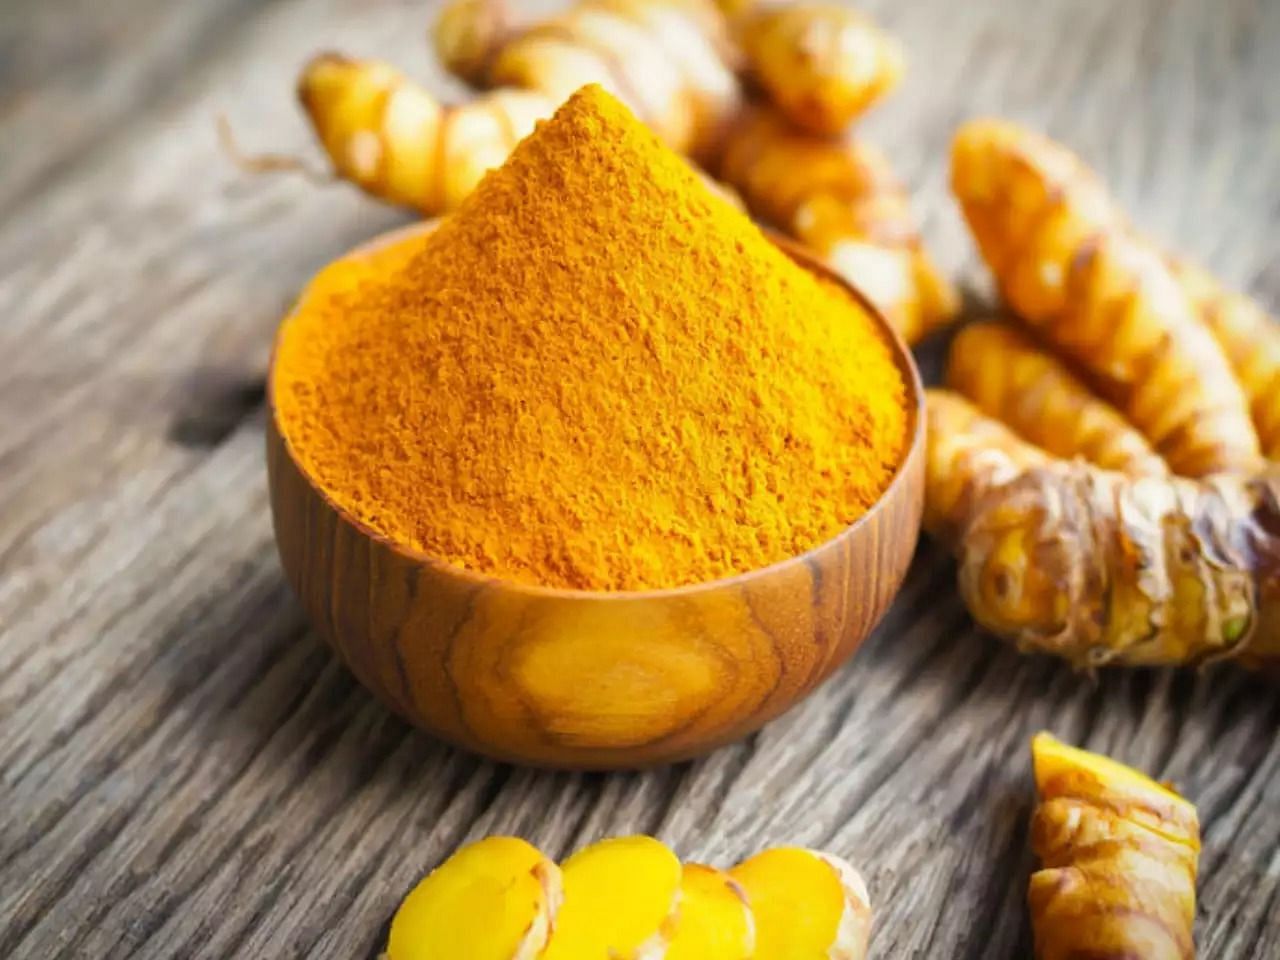 Medicinal benefits of turmeric (Image via Getty Images)